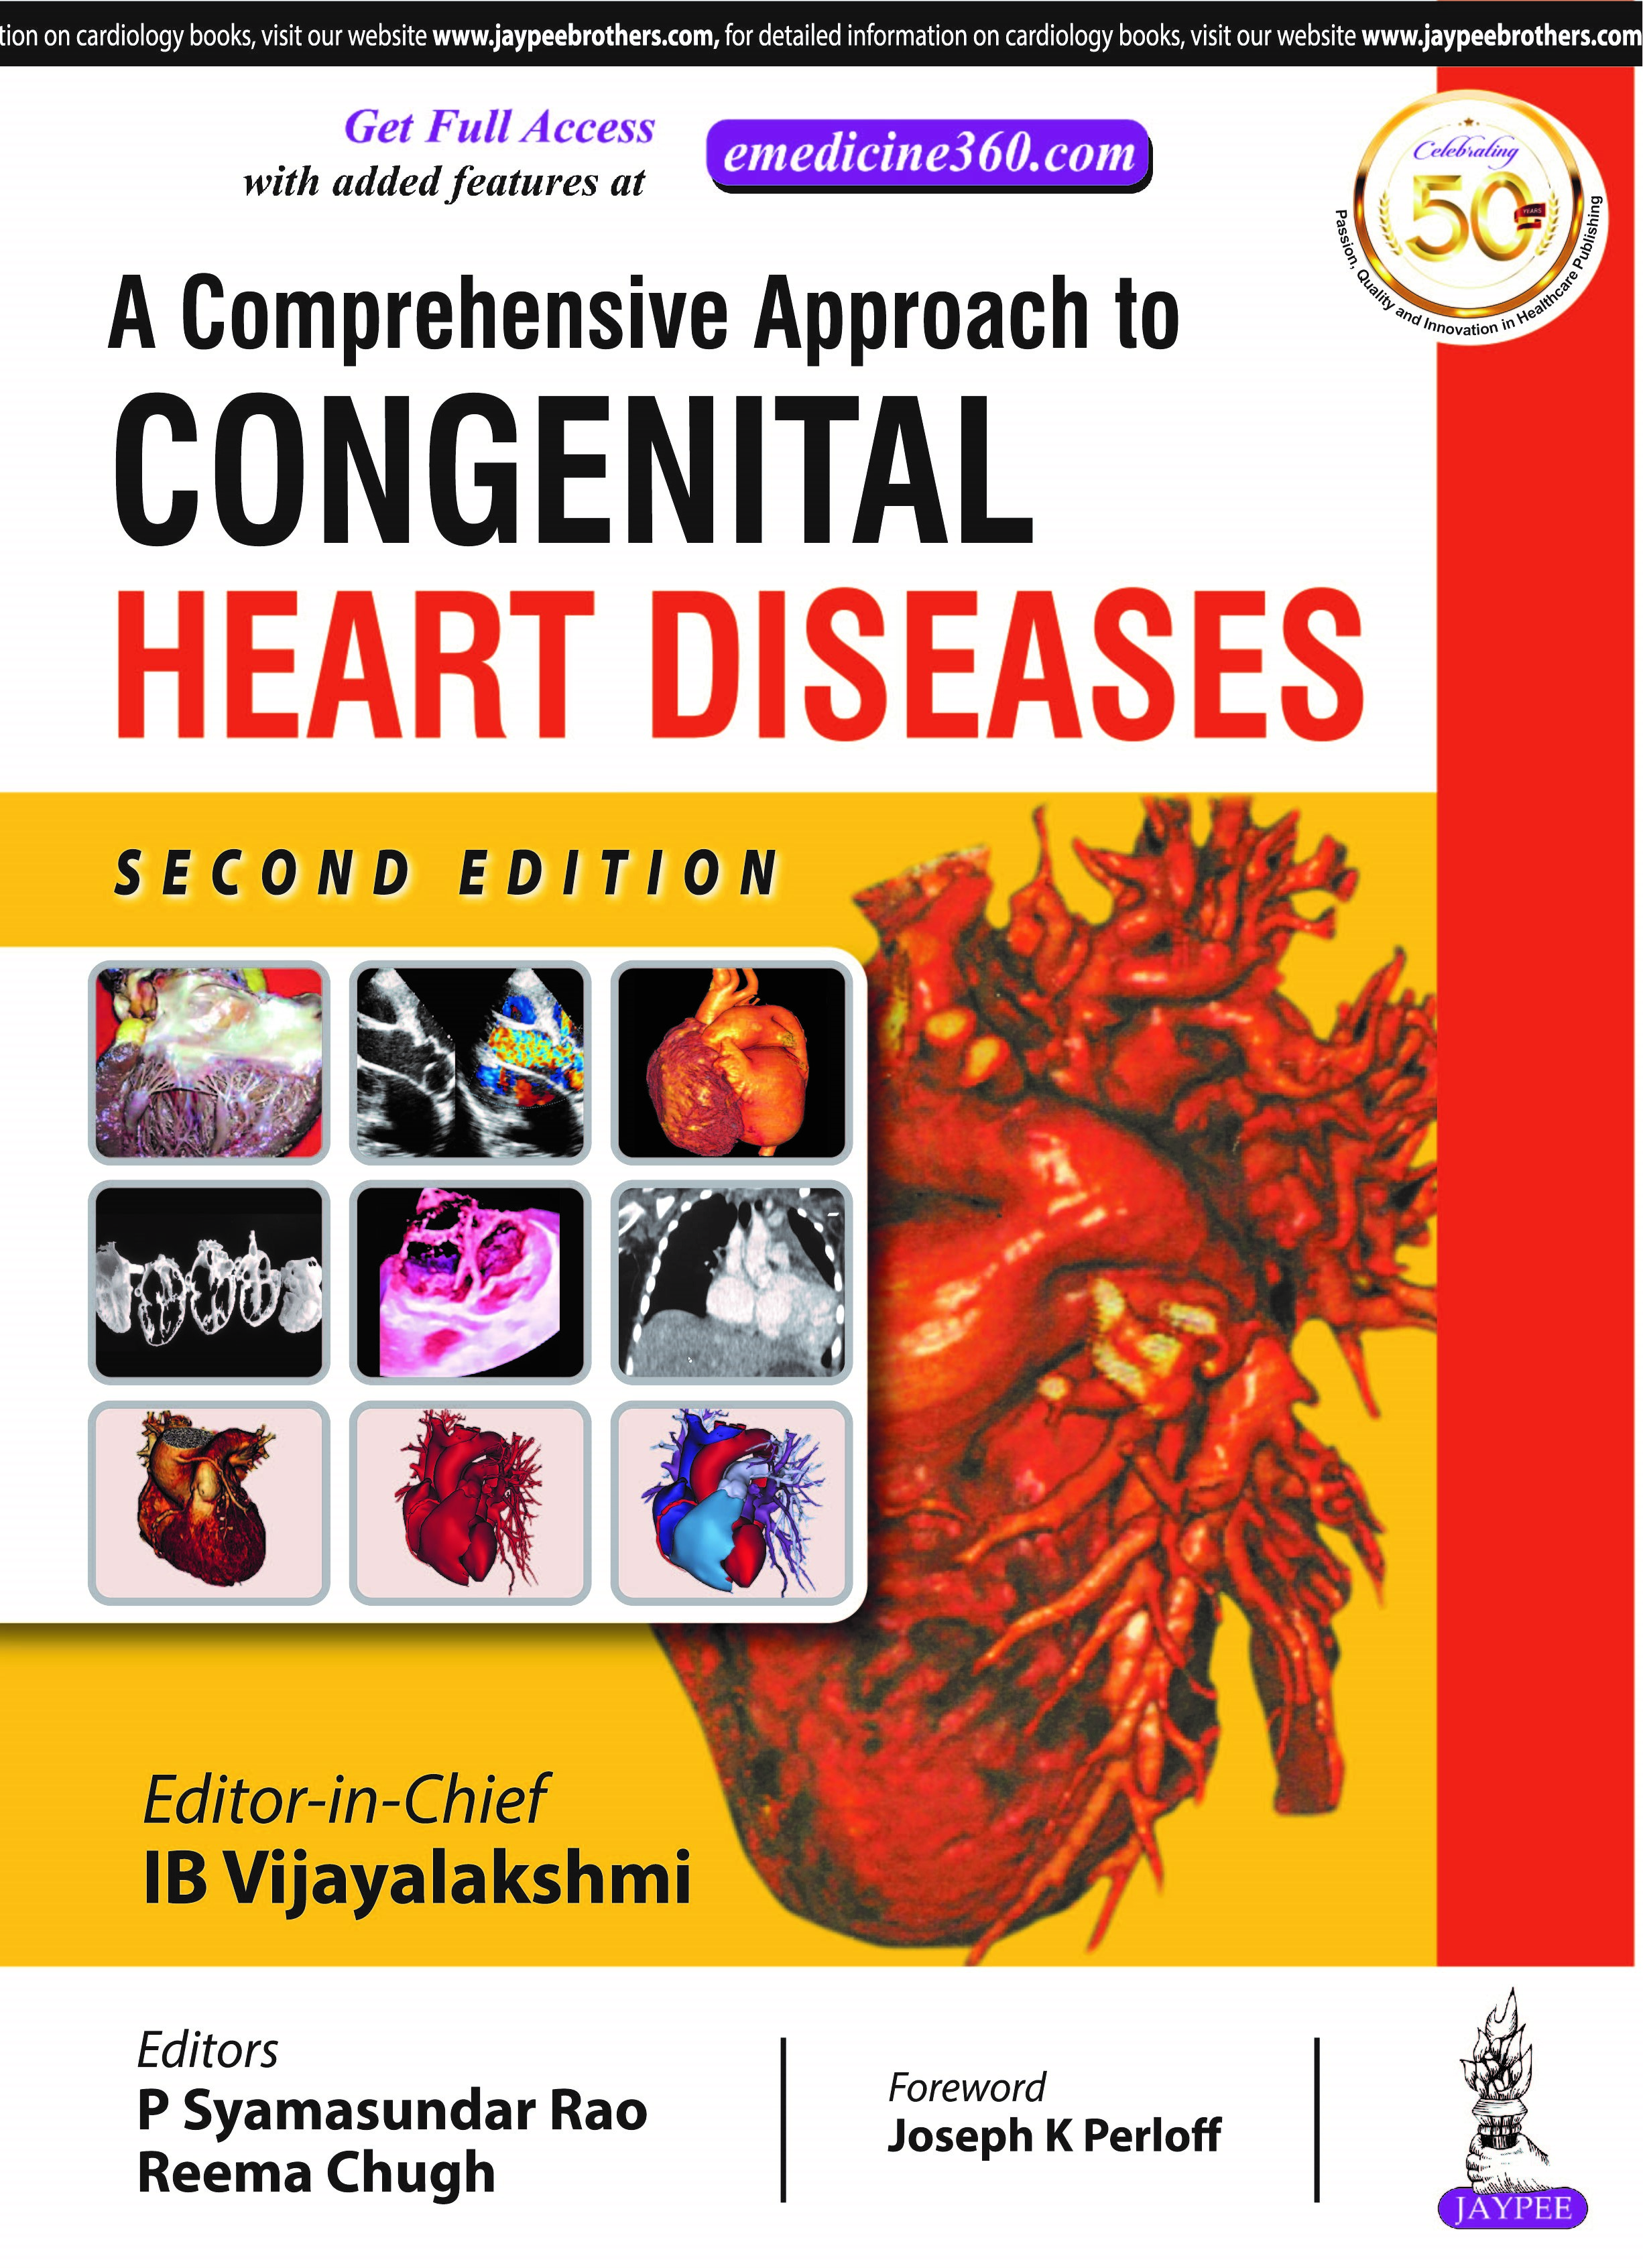 A Comprehensive Approach To Congenital Heart Diseases